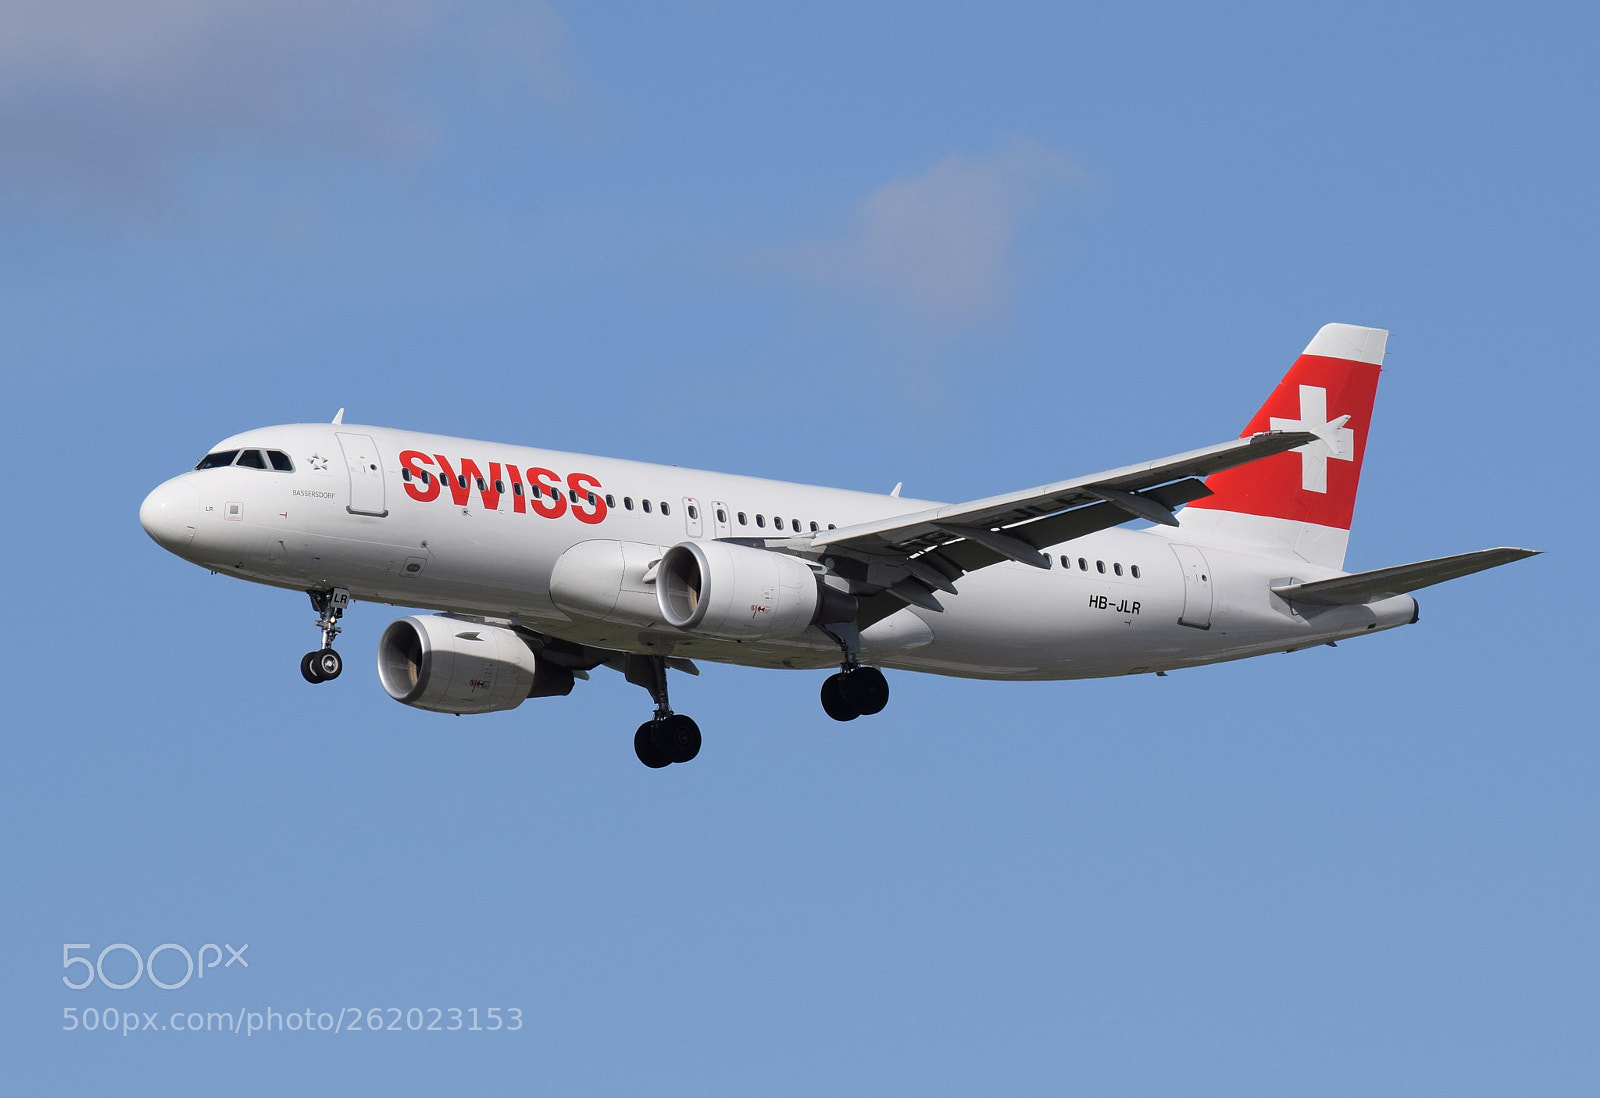 Tamron SP 70-300mm F4-5.6 Di VC USD sample photo. Swiss international air lines photography